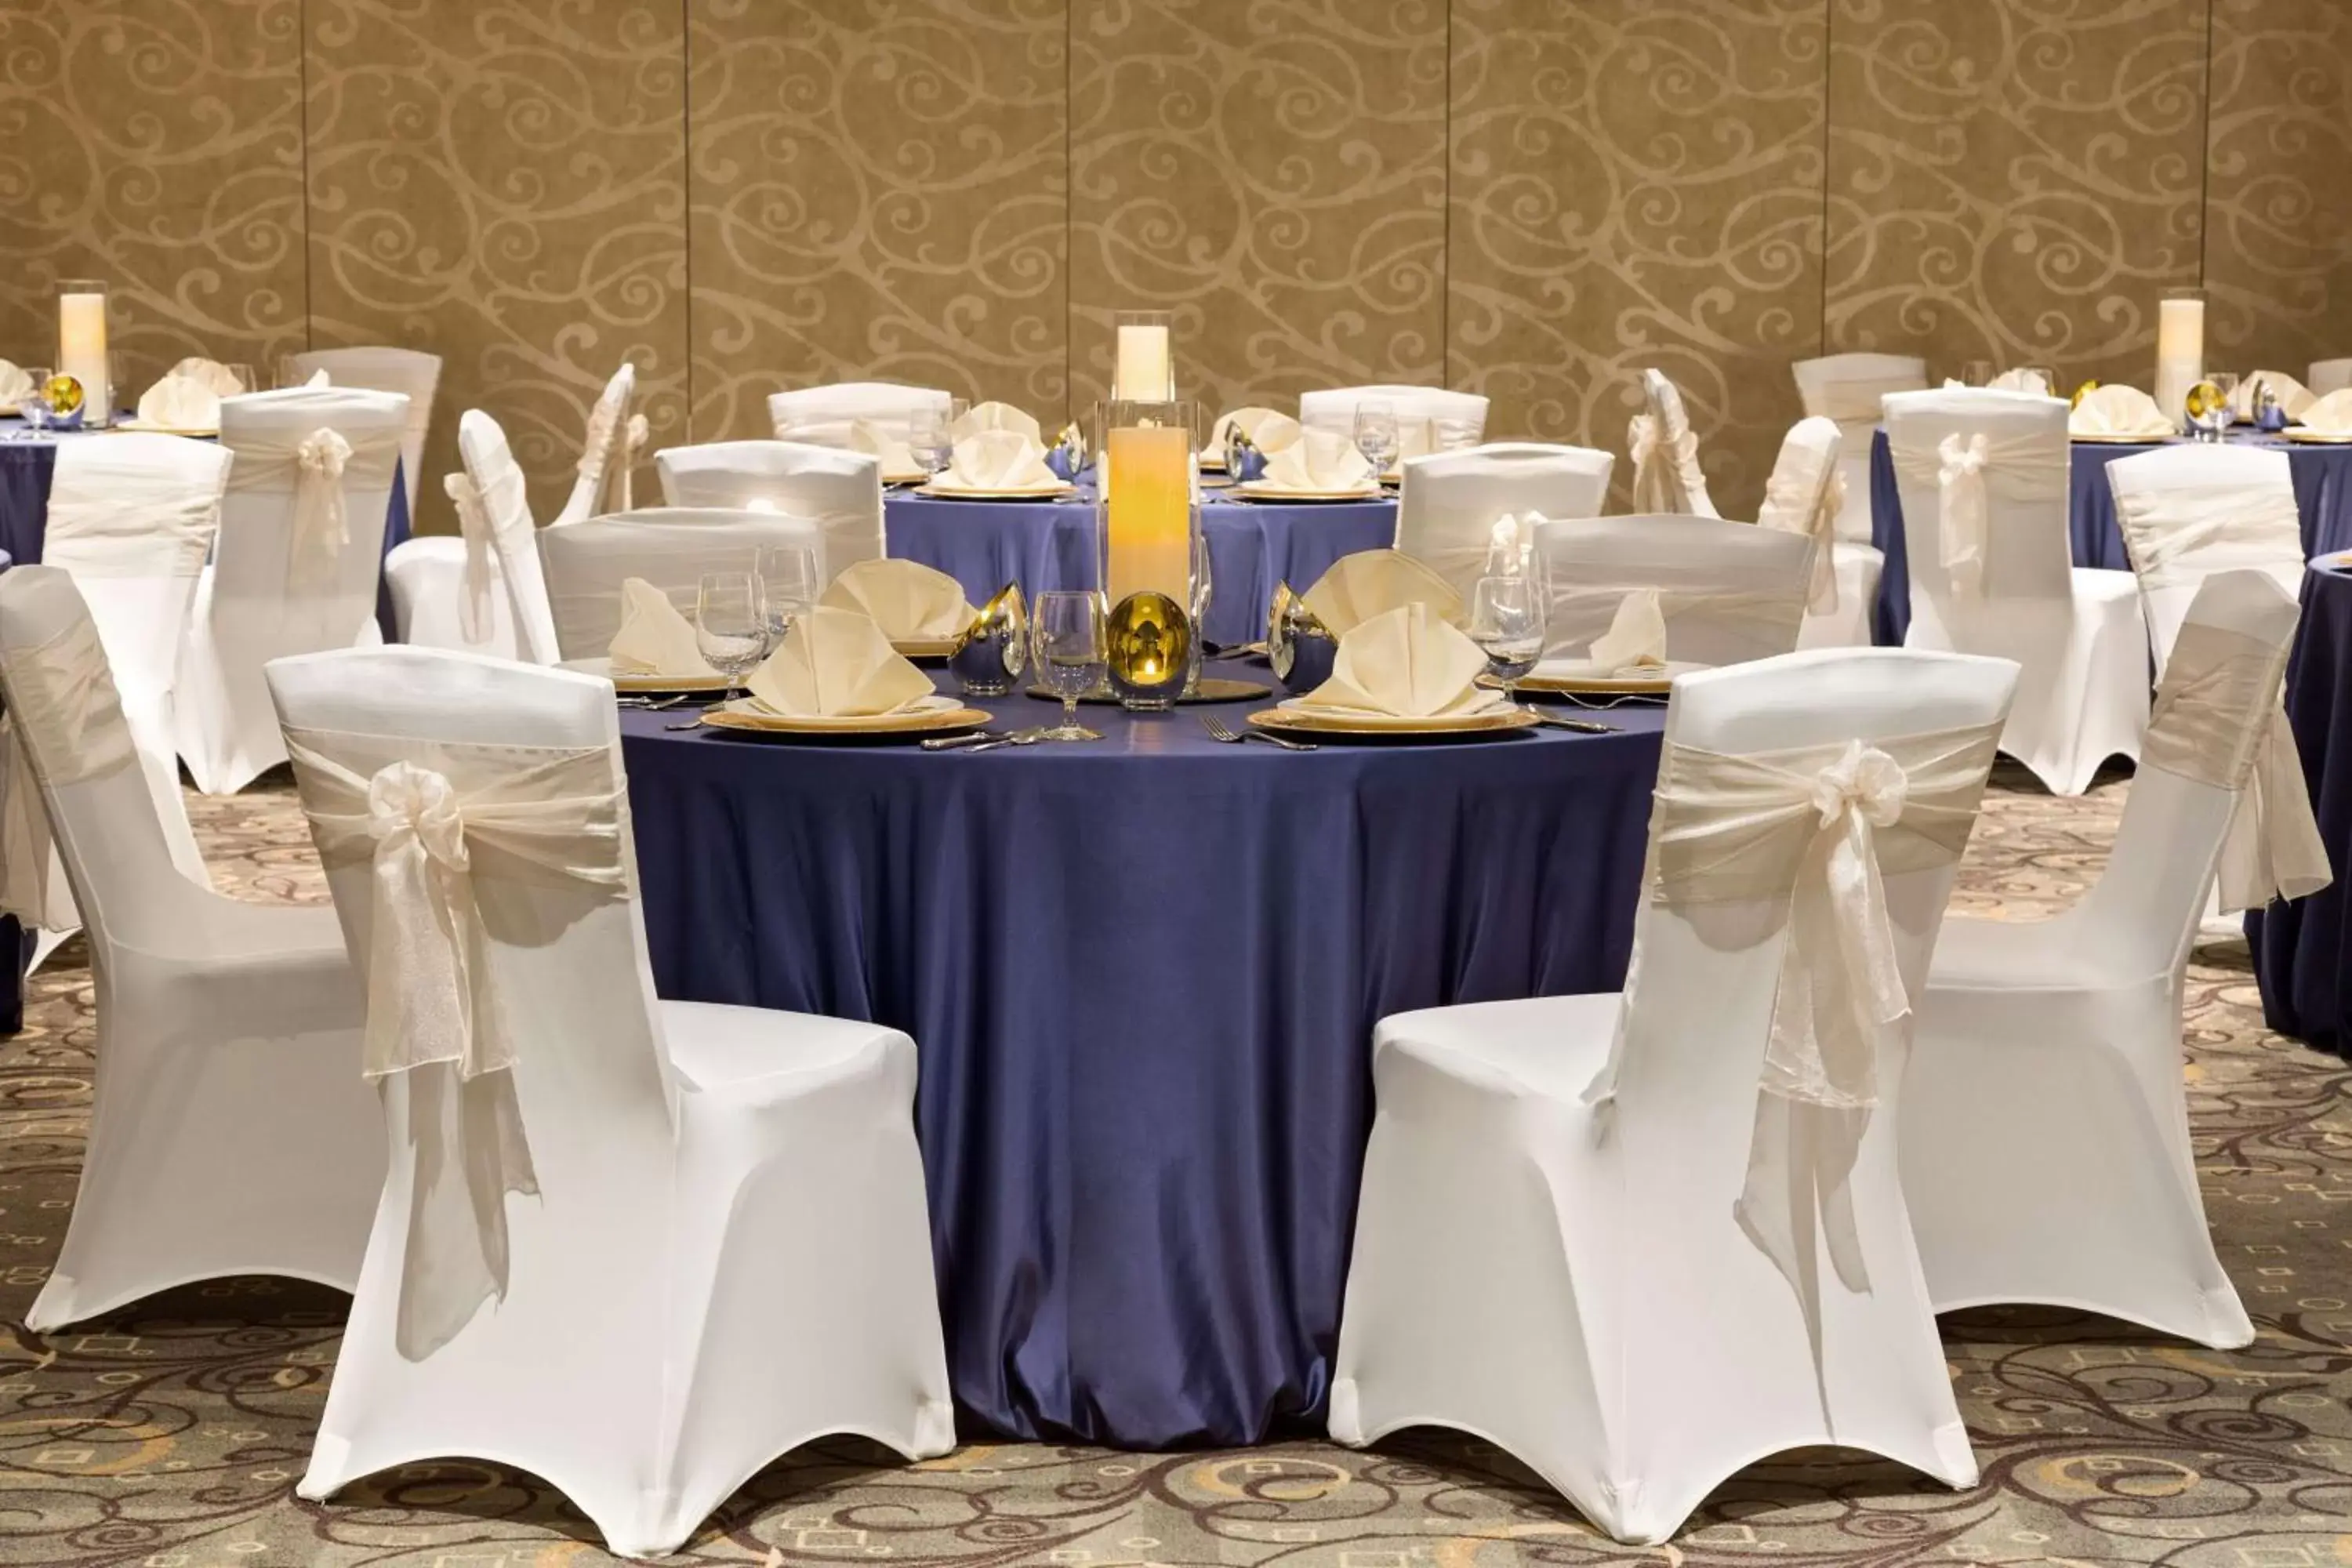 Meeting/conference room, Banquet Facilities in Hilton Garden Inn Houston Northwest